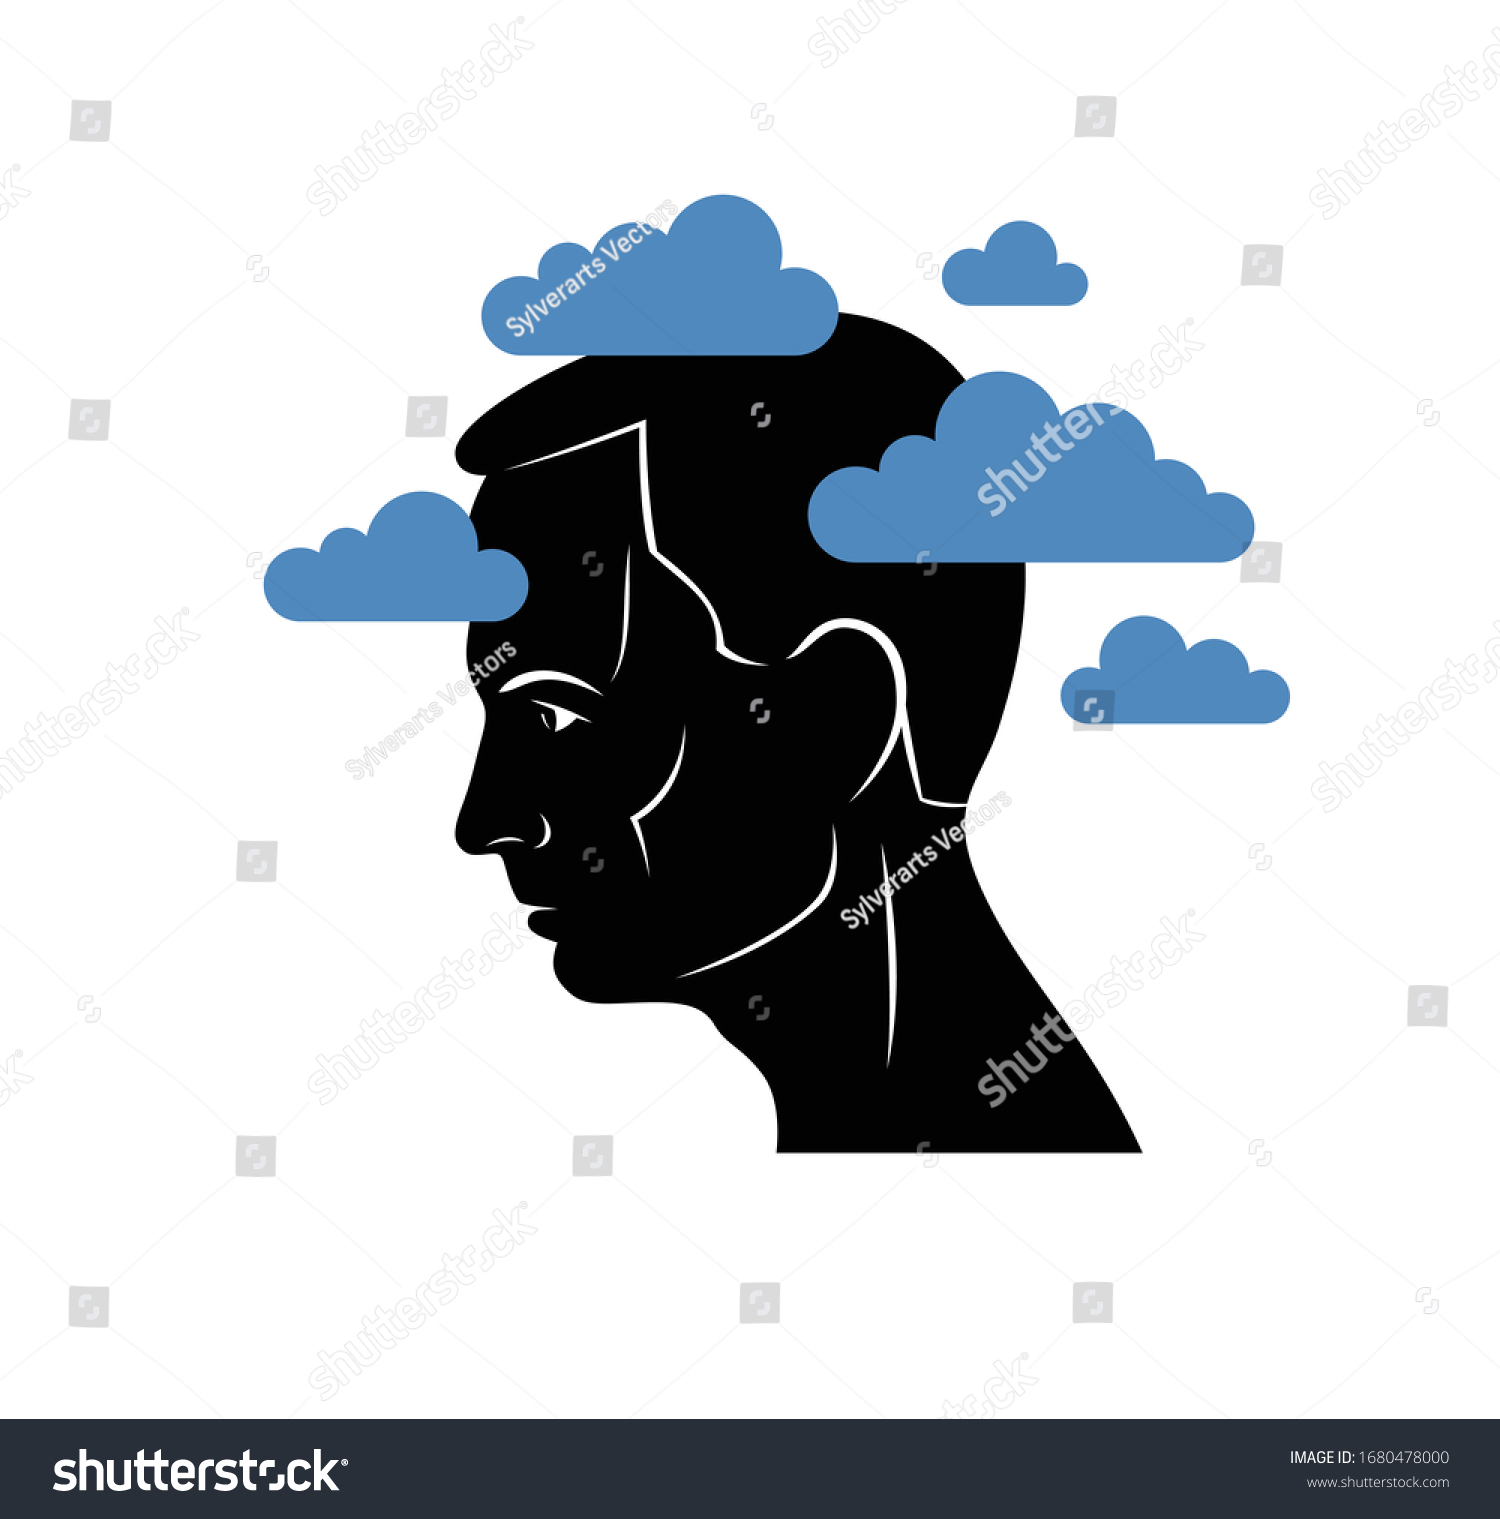 Depression mental health and high anxiety vector conceptual illustration or logo visualized by man face profile and dark clouds over his head. #1680478000